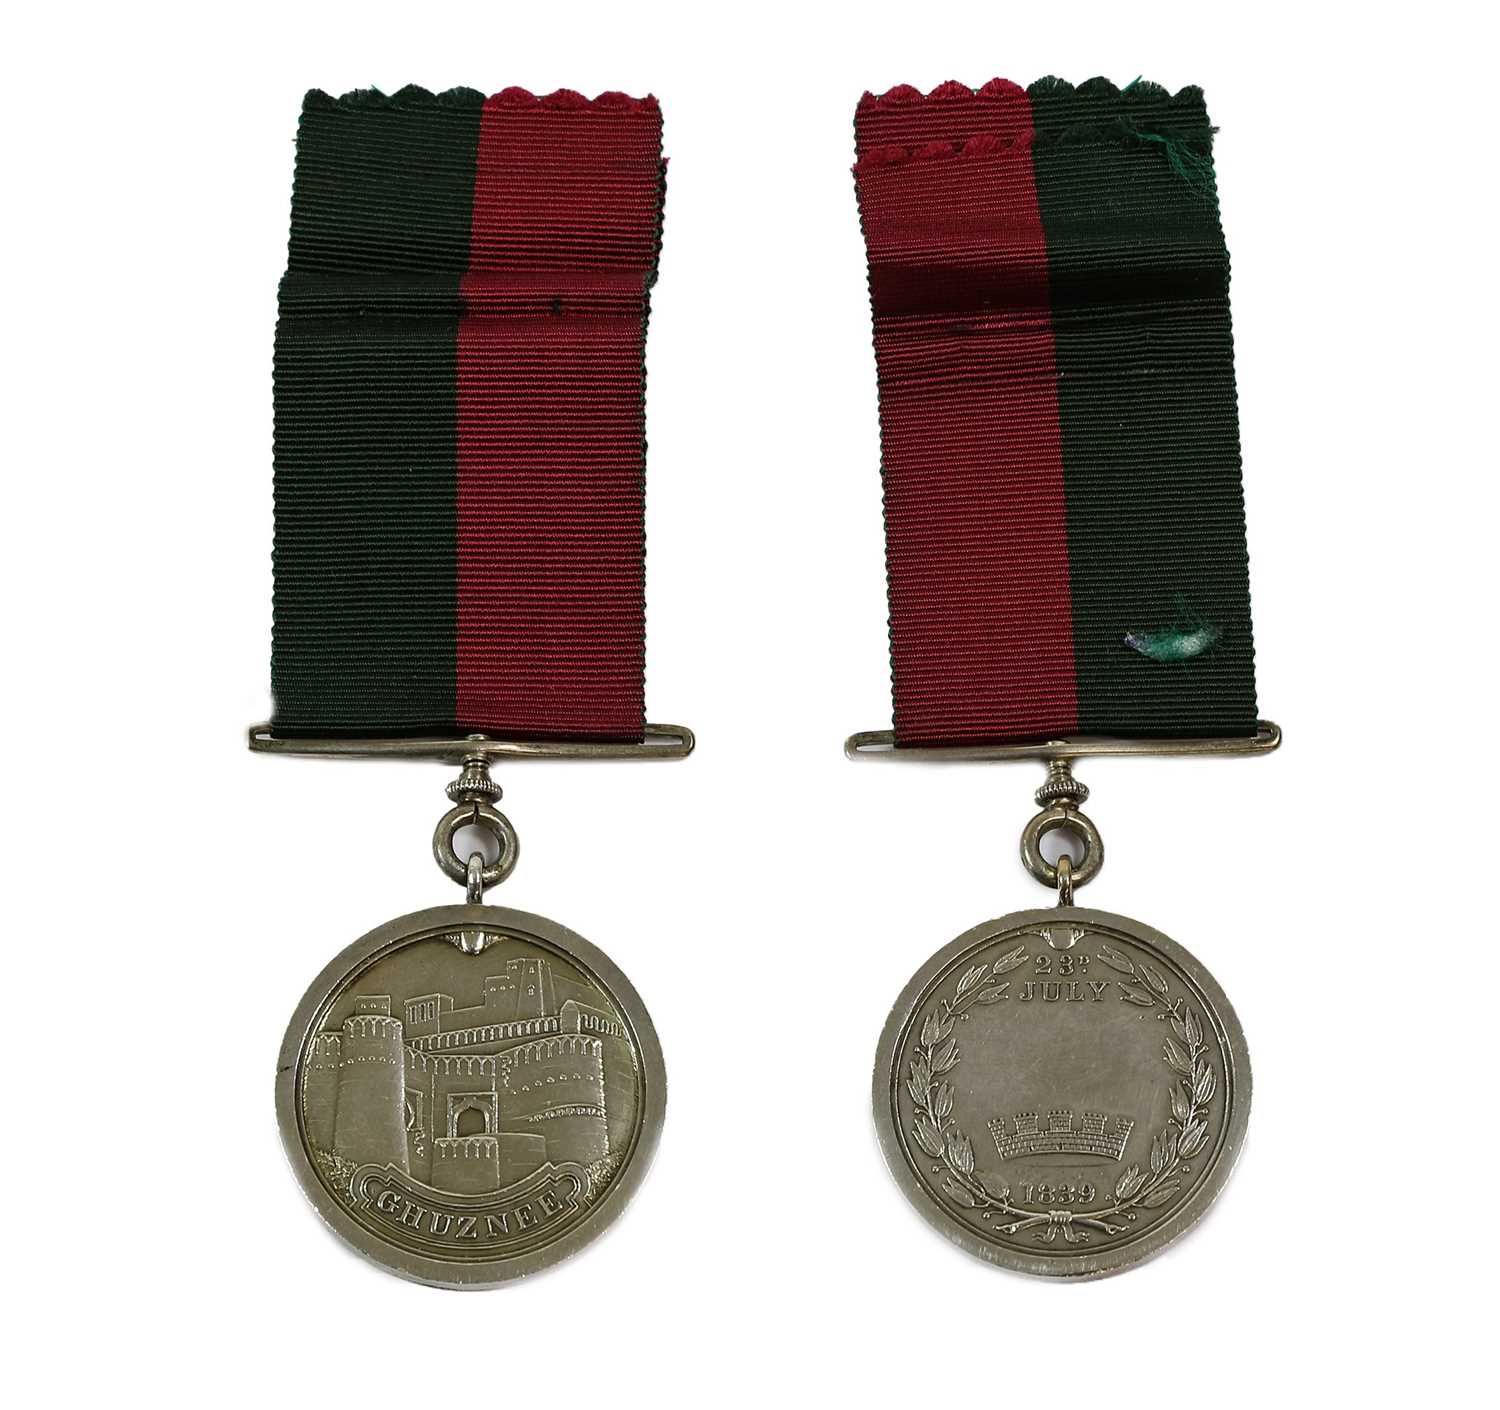 Lot 2008 - A Ghuznee Medal, 1839, un-named as issued